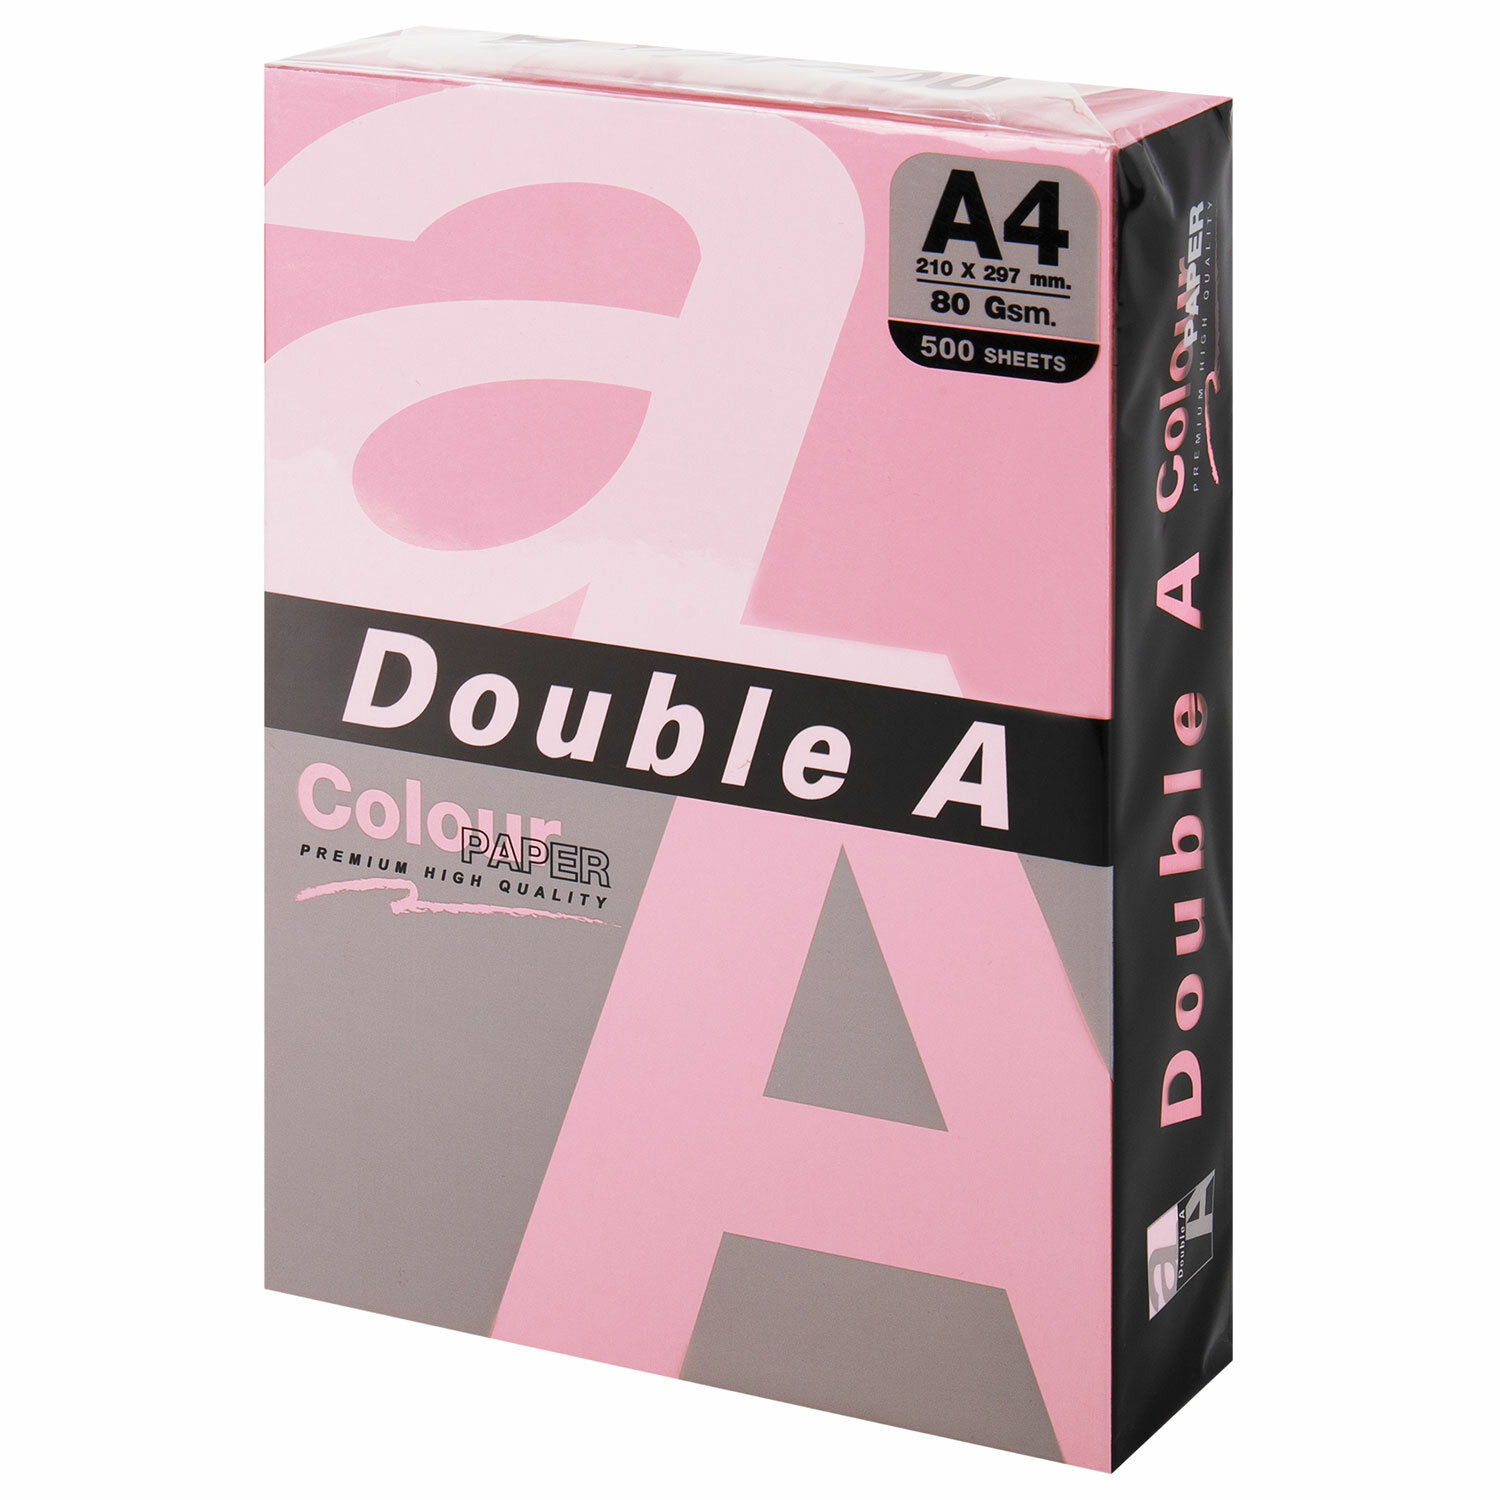  DOUBLE A 115120